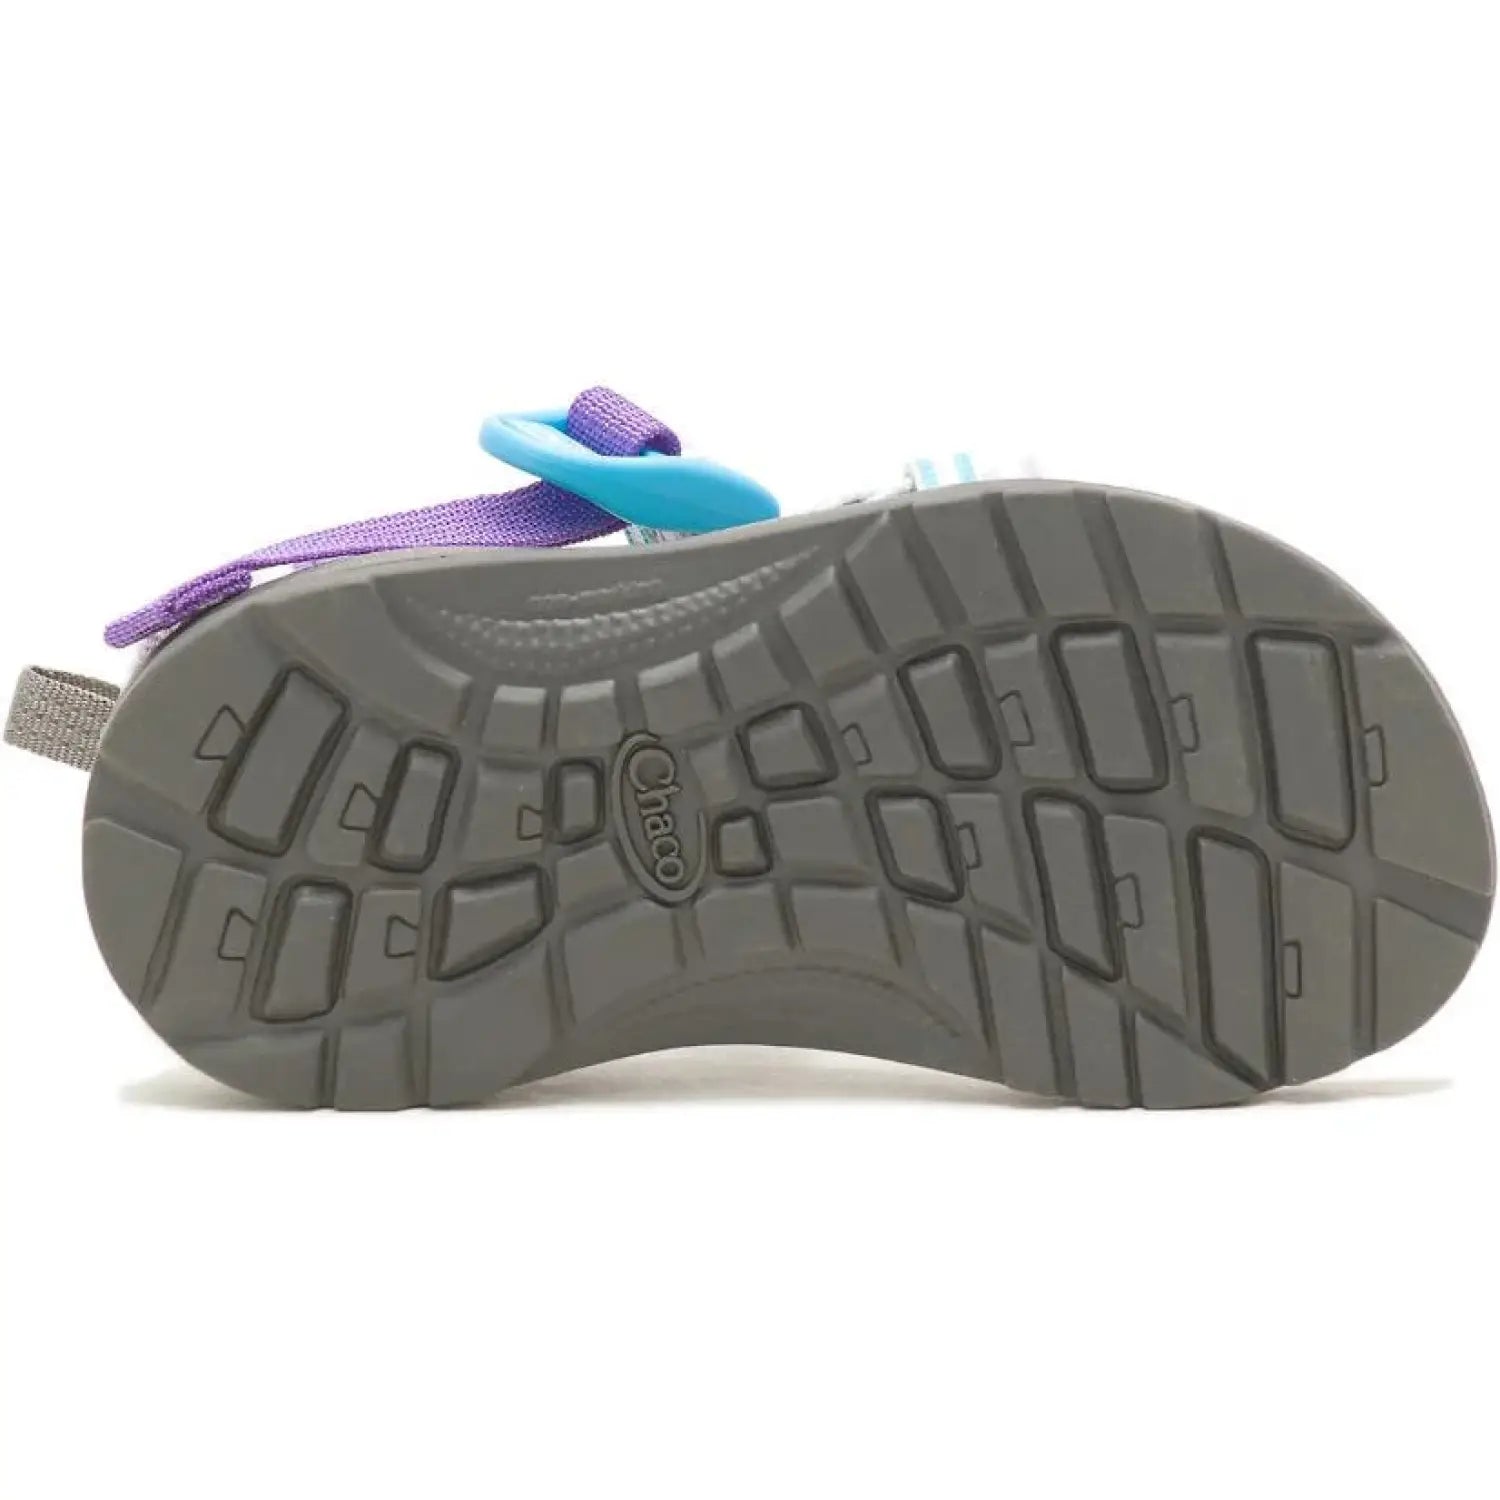 Chaco Kid's ZX/1 Ecotread™ Sandal Vary Purple Rose Bottom View